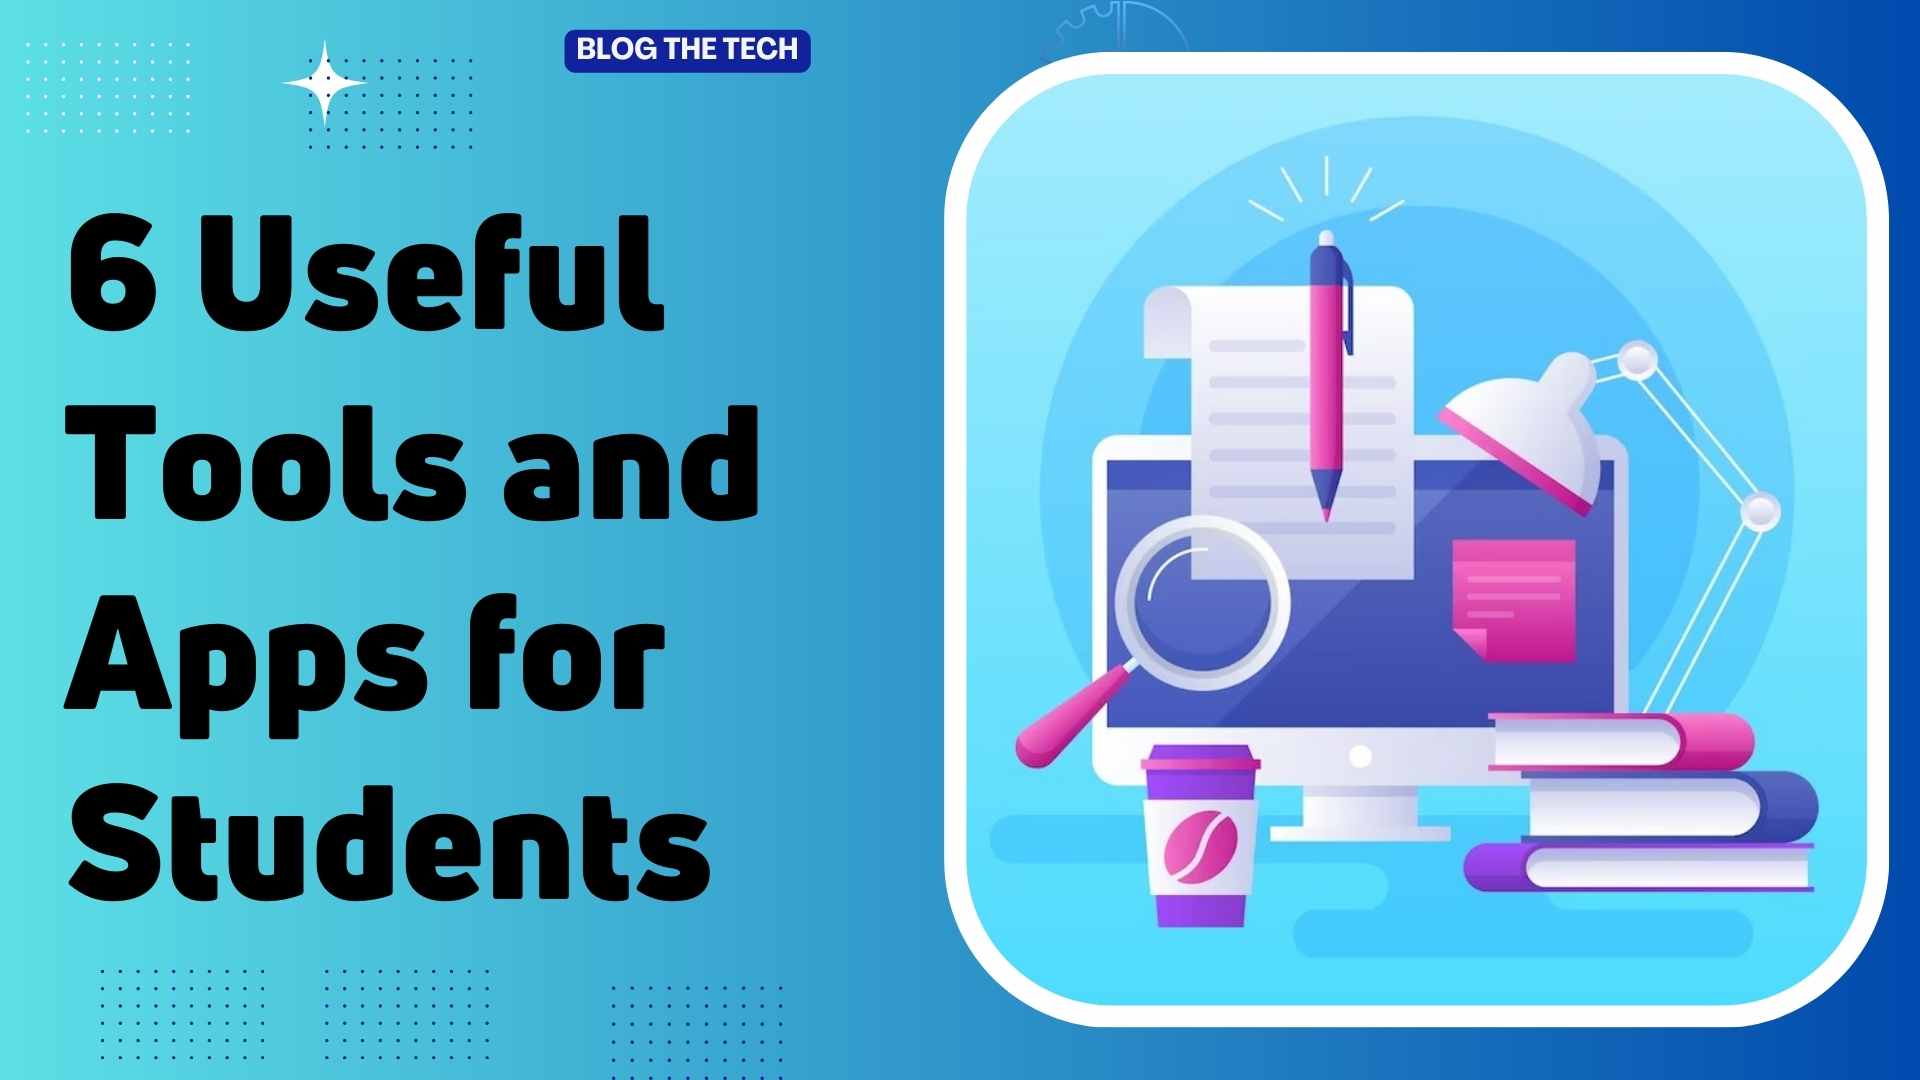 6 Useful Tools and Apps for Students